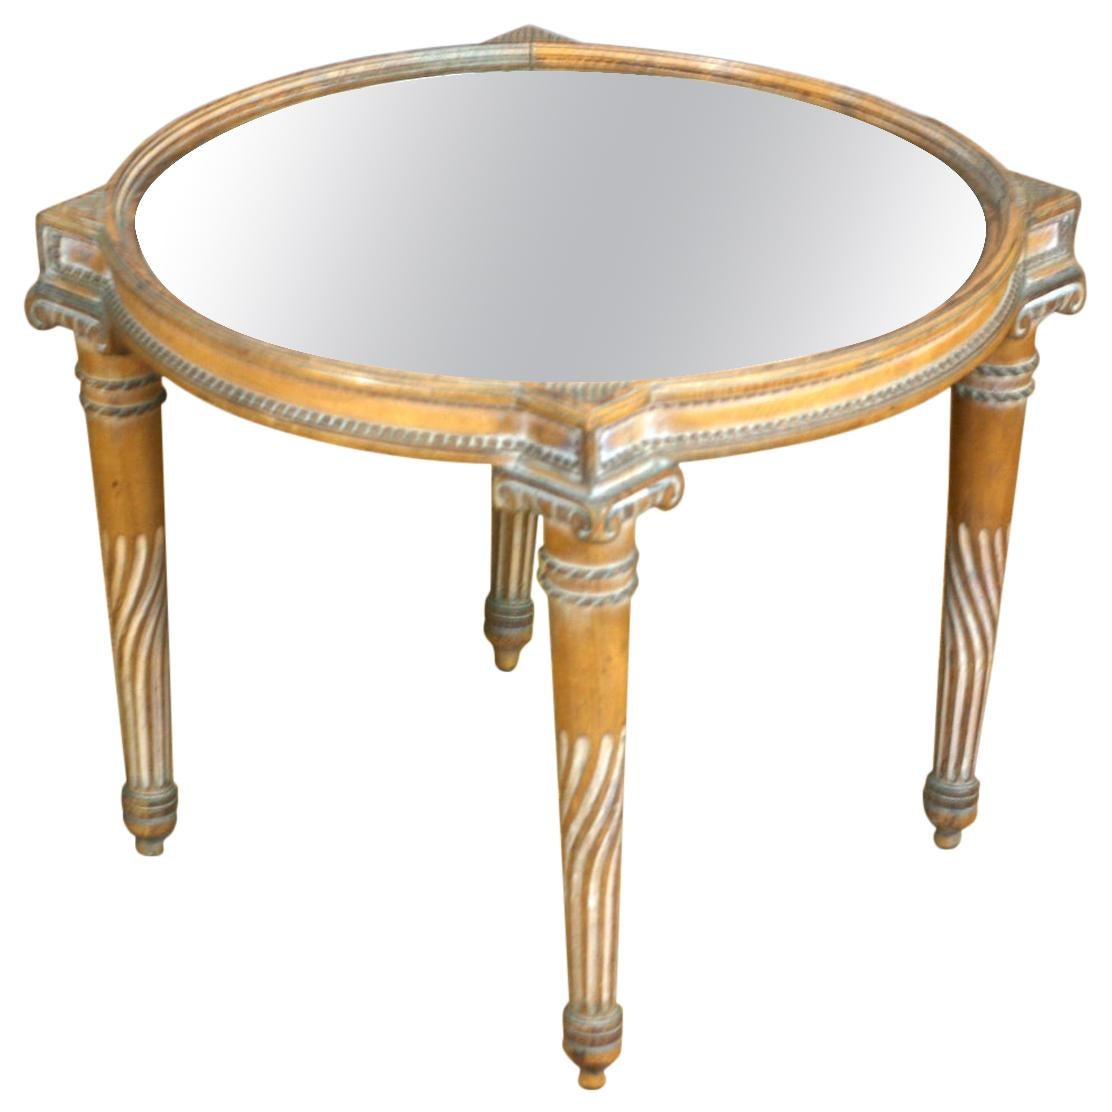 Neoclassical Revival Mirrored Table